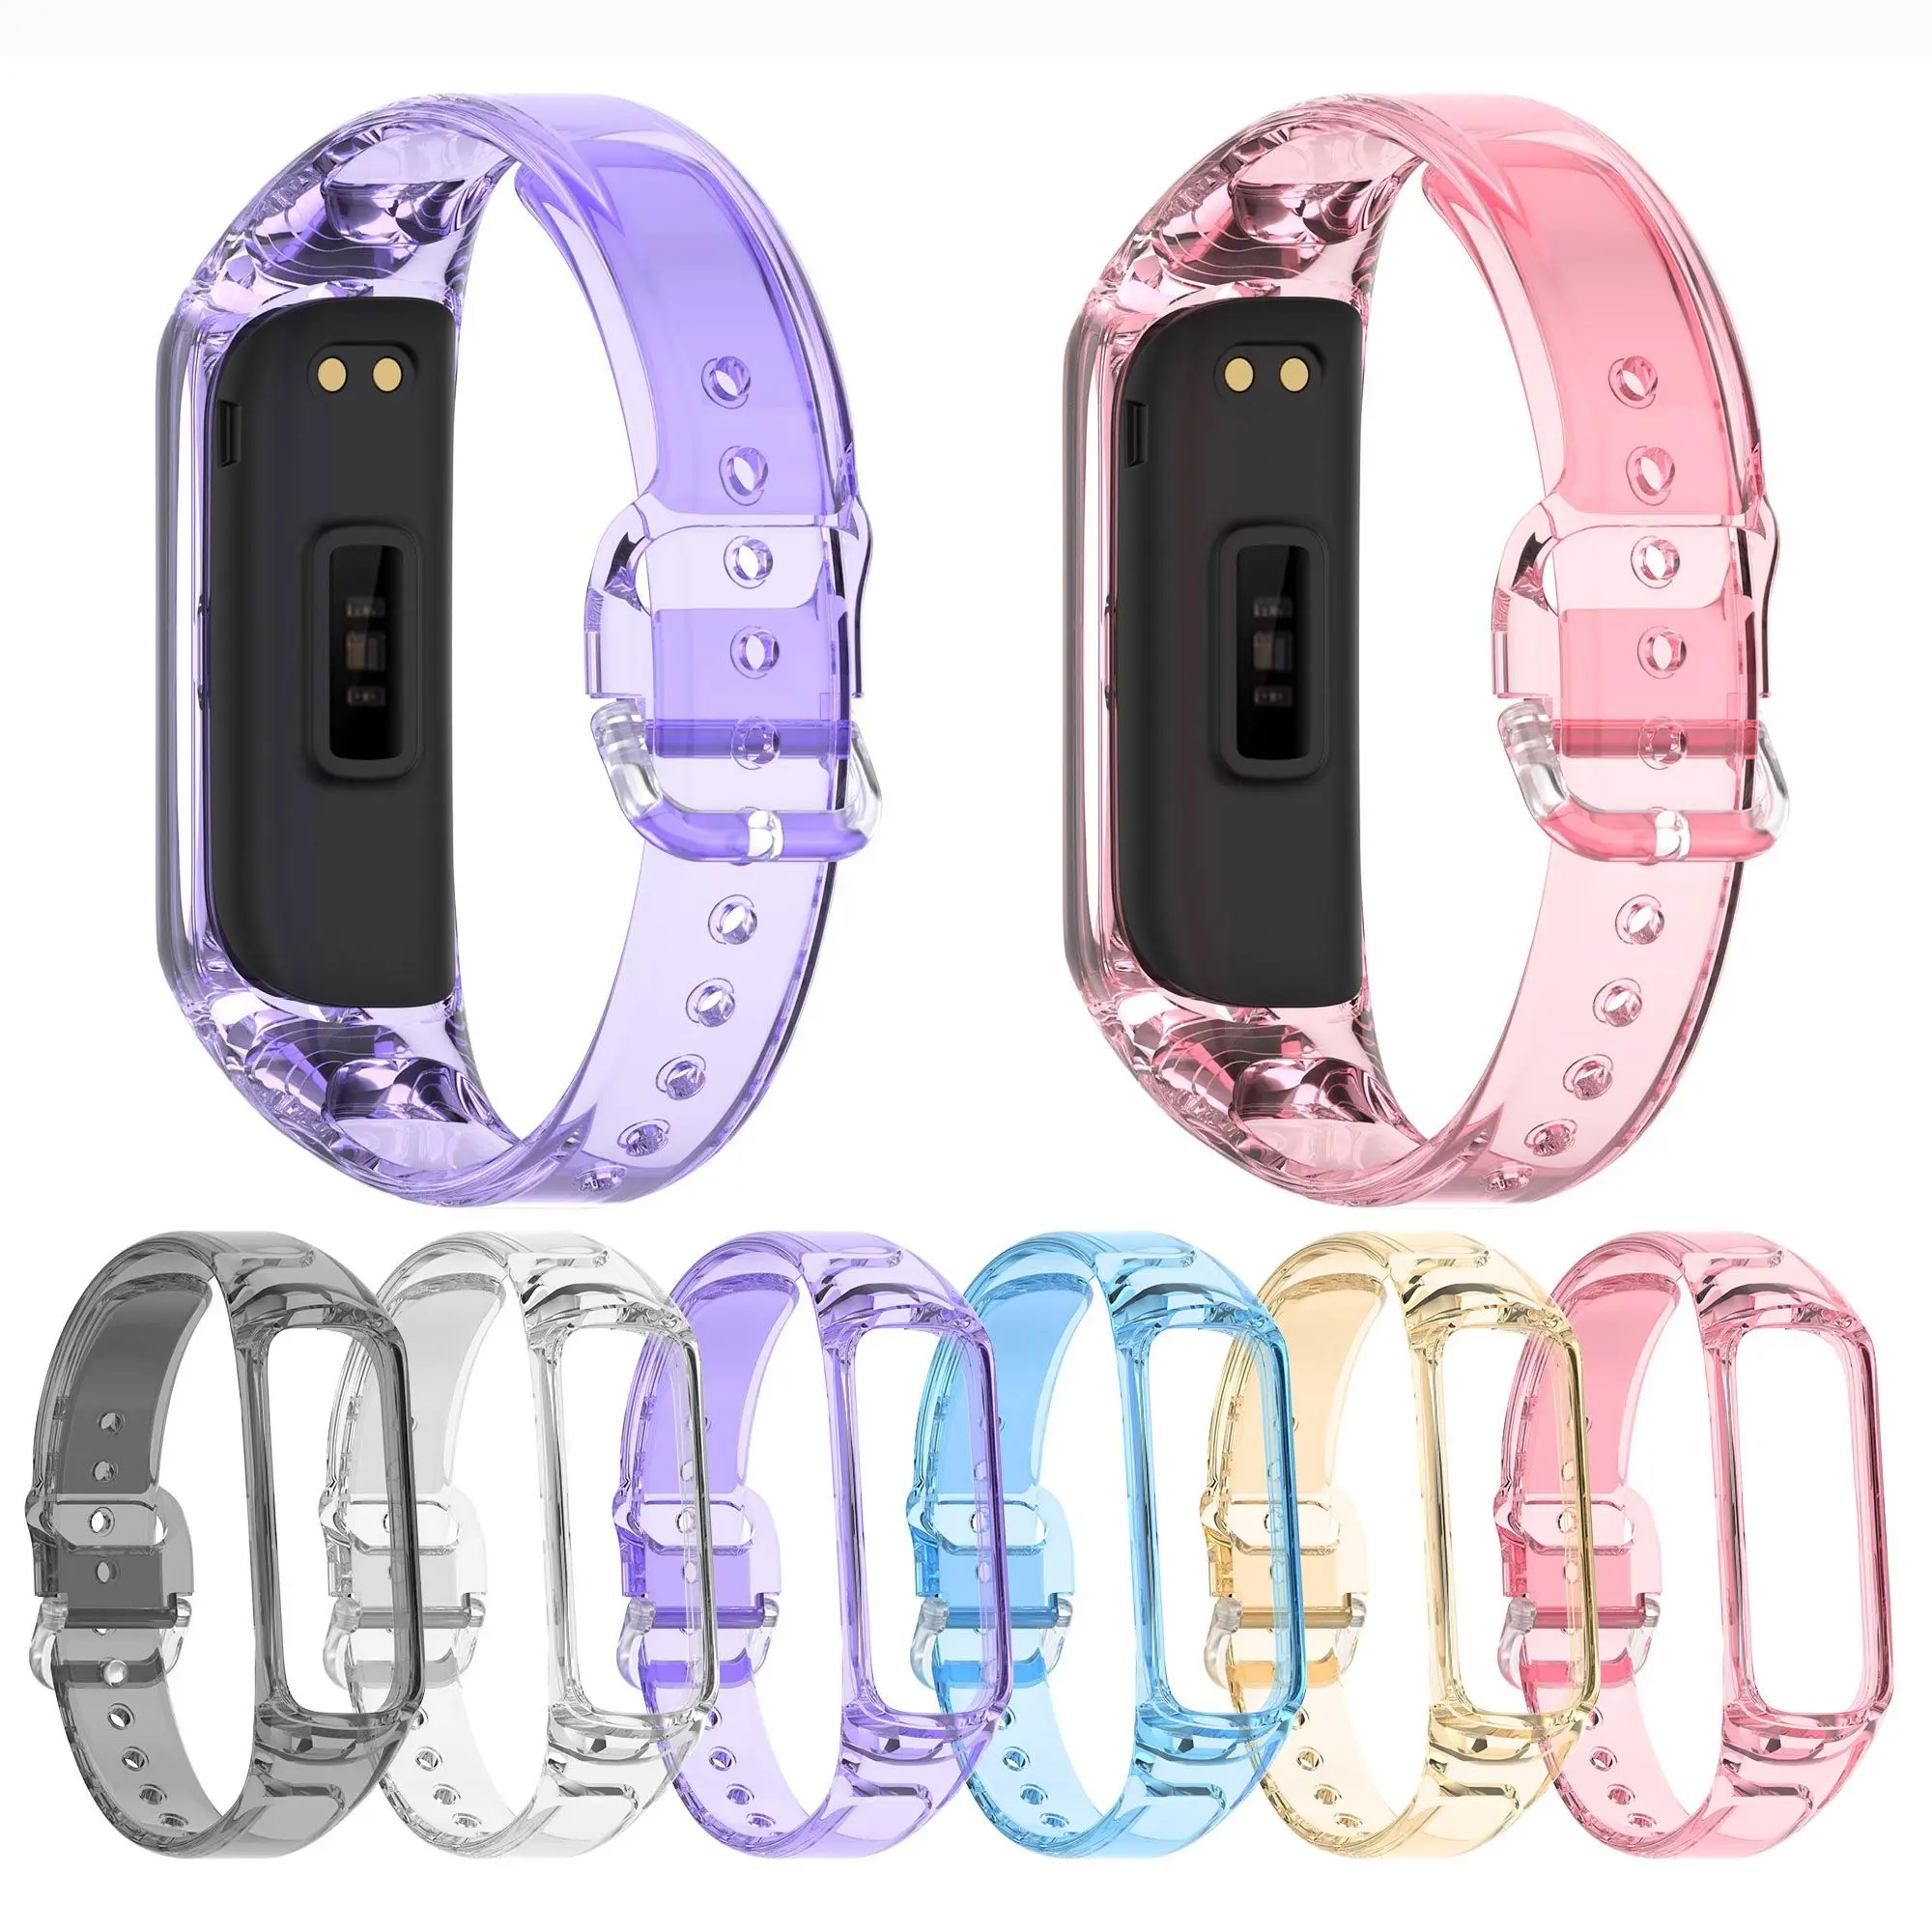 

Silicone Sport Band Strap For Samsung Galaxy Fit 2 SM-R220 Watch Bracelet Replacement Watchband Discoloration In Light Strap